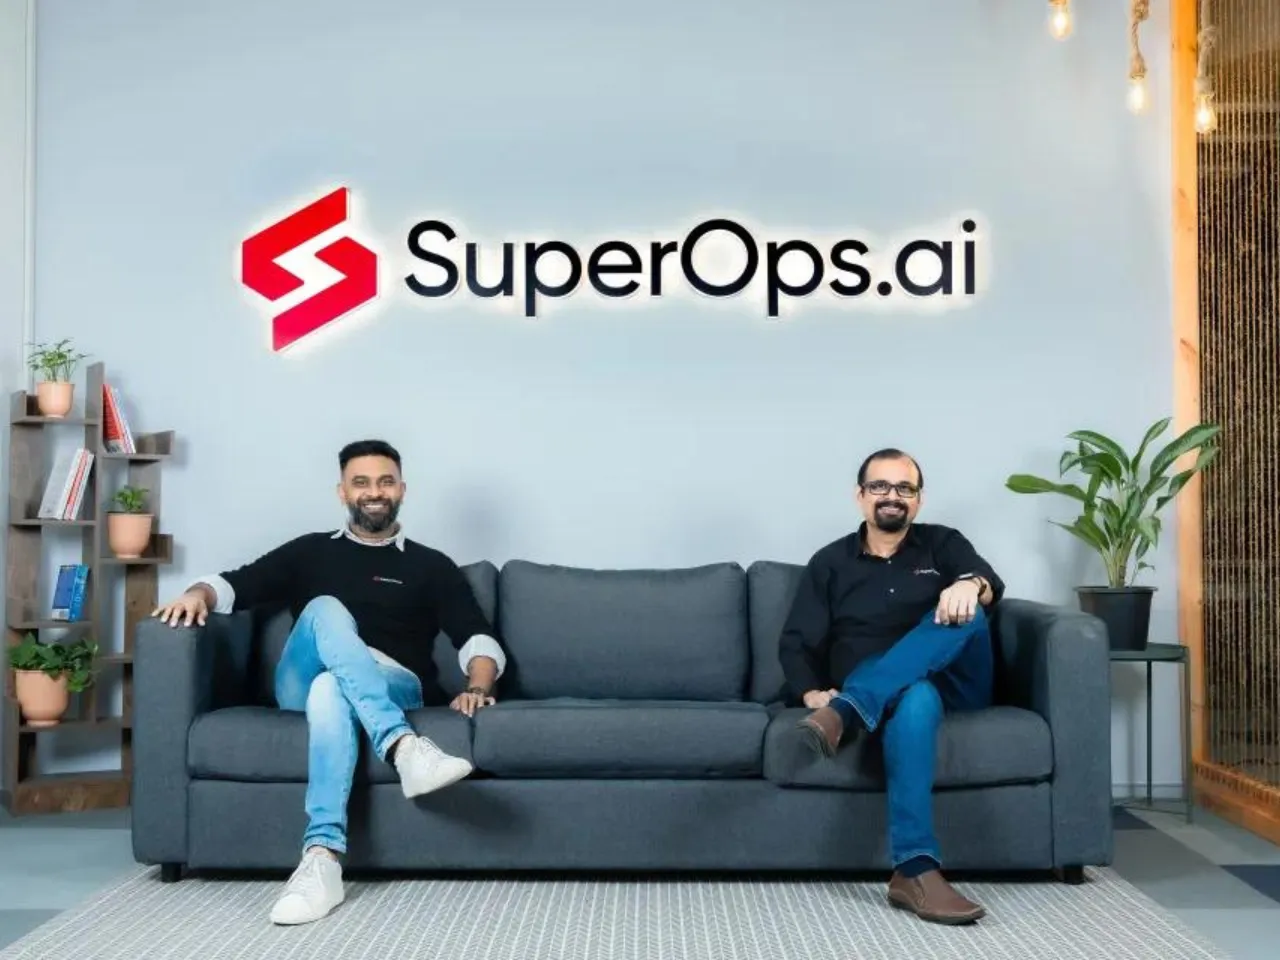 SuperOps.ai Founders